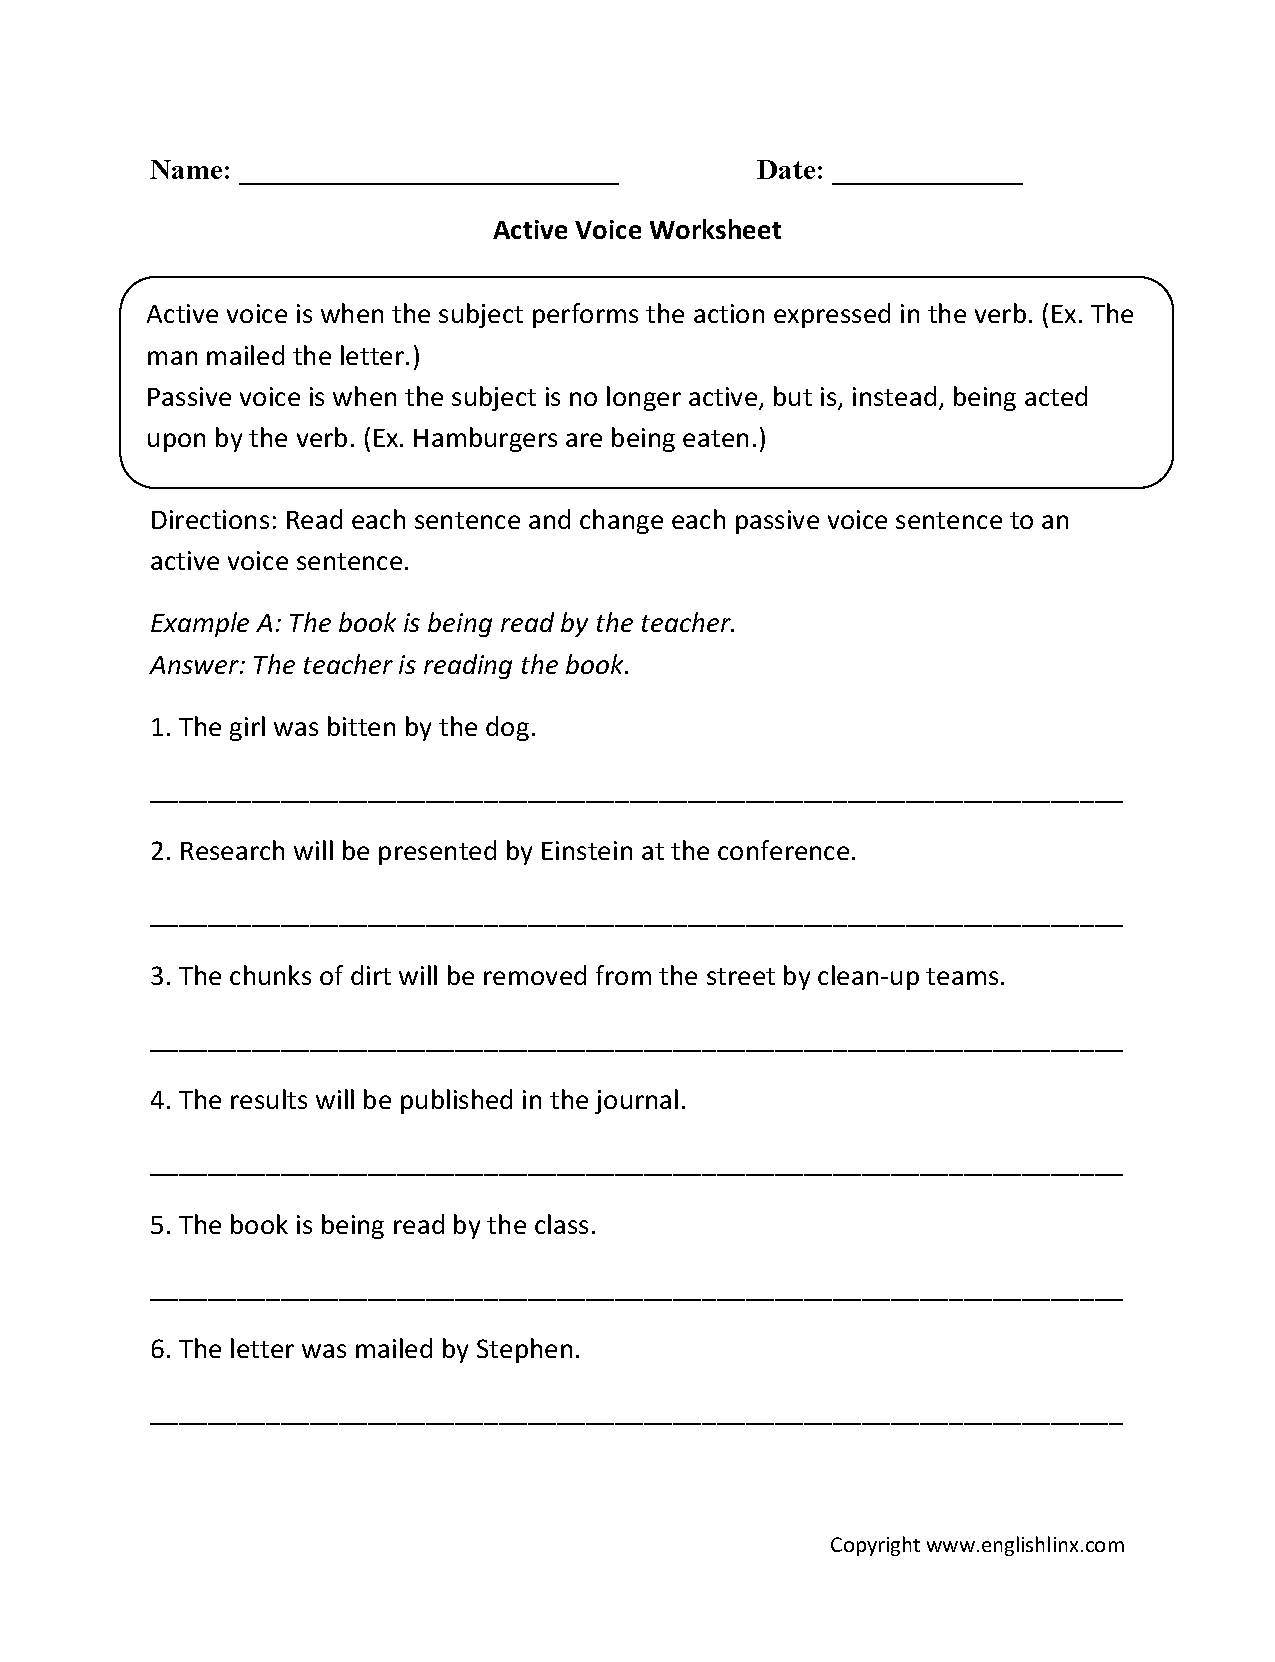 Active Voice Worksheets